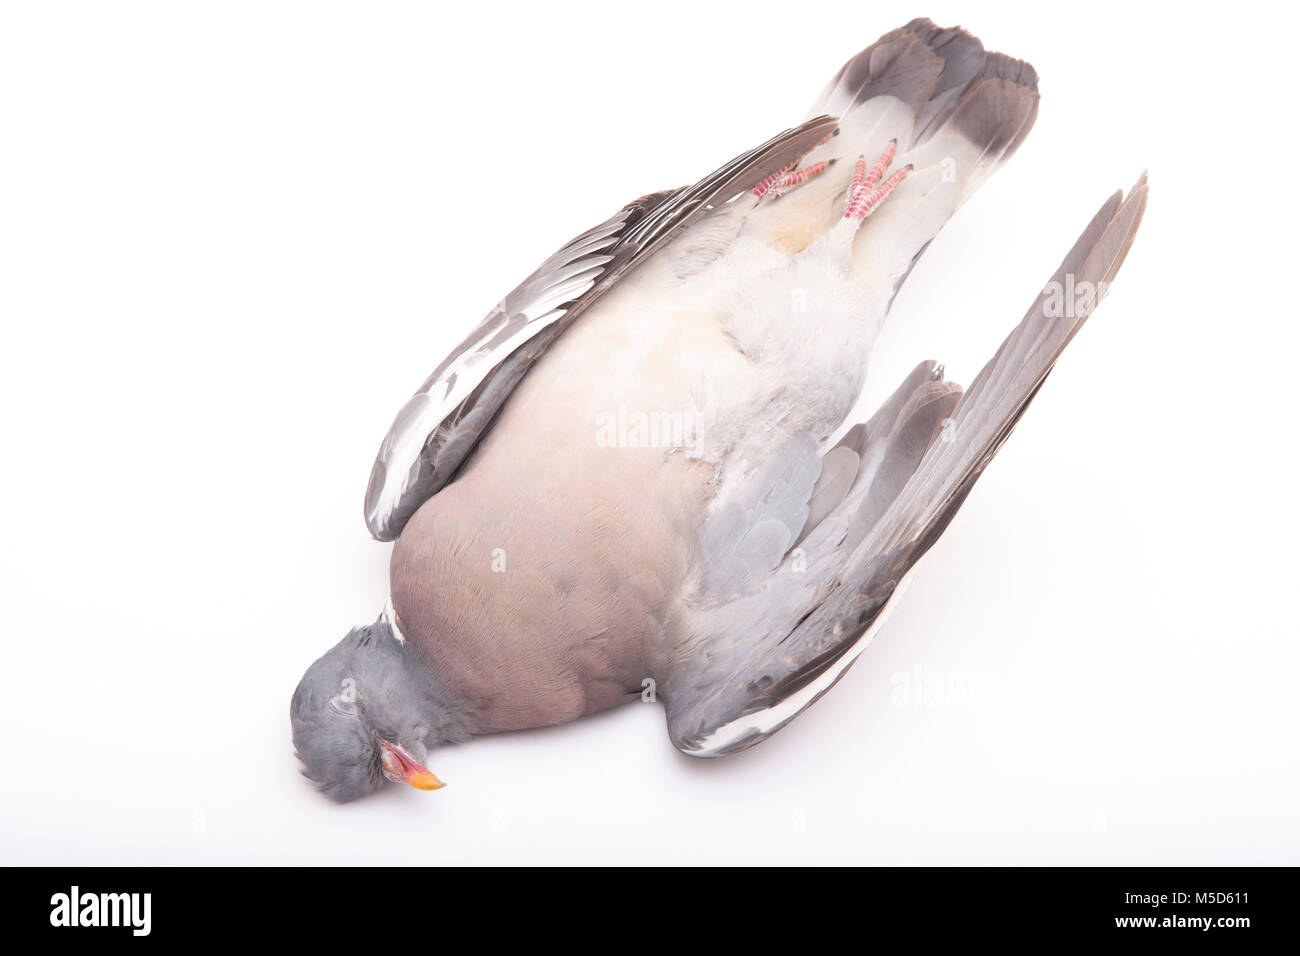 Woodpigeon that has been shot and will be plucked before cooking. England UK GB Stock Photo